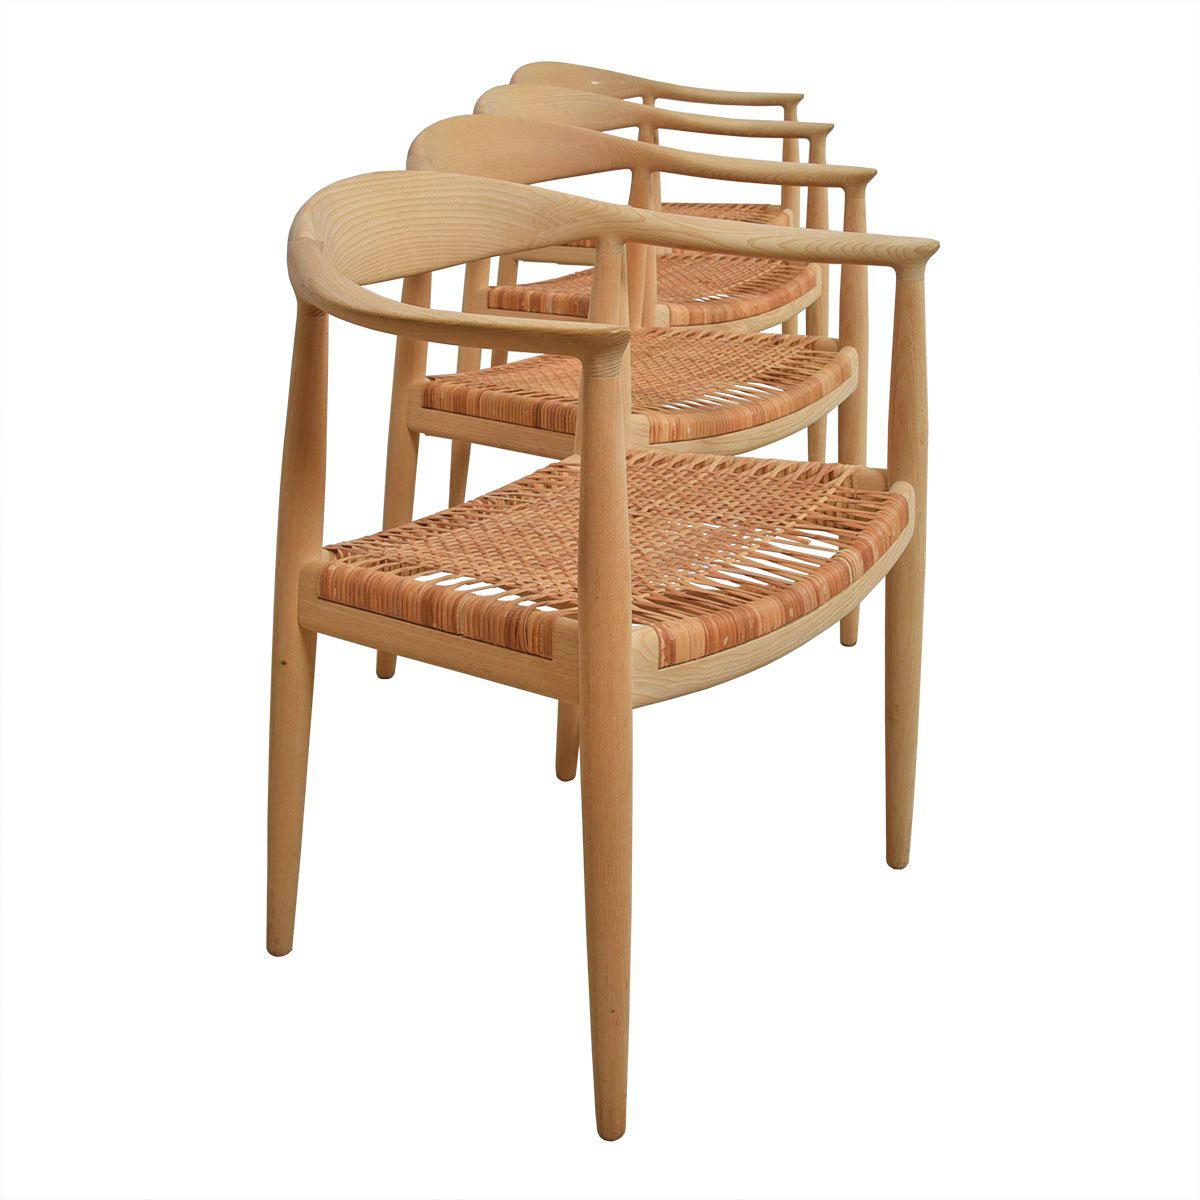 Set of 8 “The Chair” by Hans Wegner for PP Mobler

Additional information:
The PP503 Chair, designed by Hans Wegner, is identified as one of the distinctively Danish designs that came to define the Mid Century modernist movement in interior